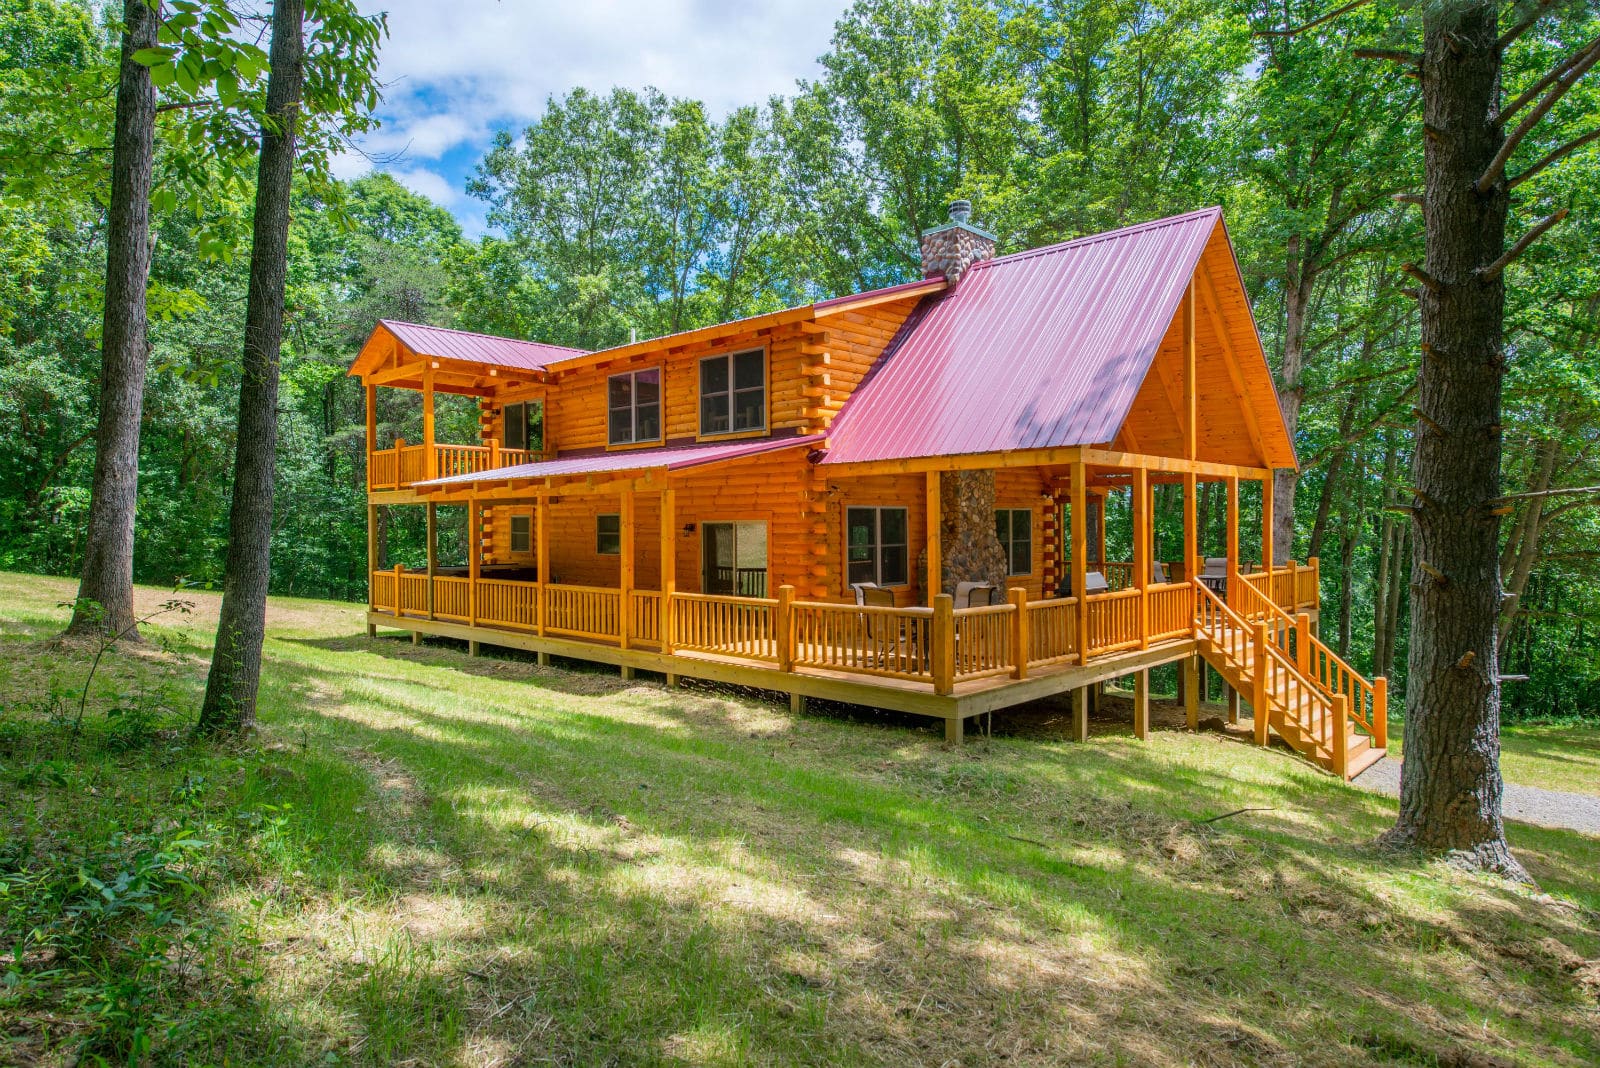 Hocking Hills Cabin Rentals by Buffalo Cabins & Lodges   Book Top ...